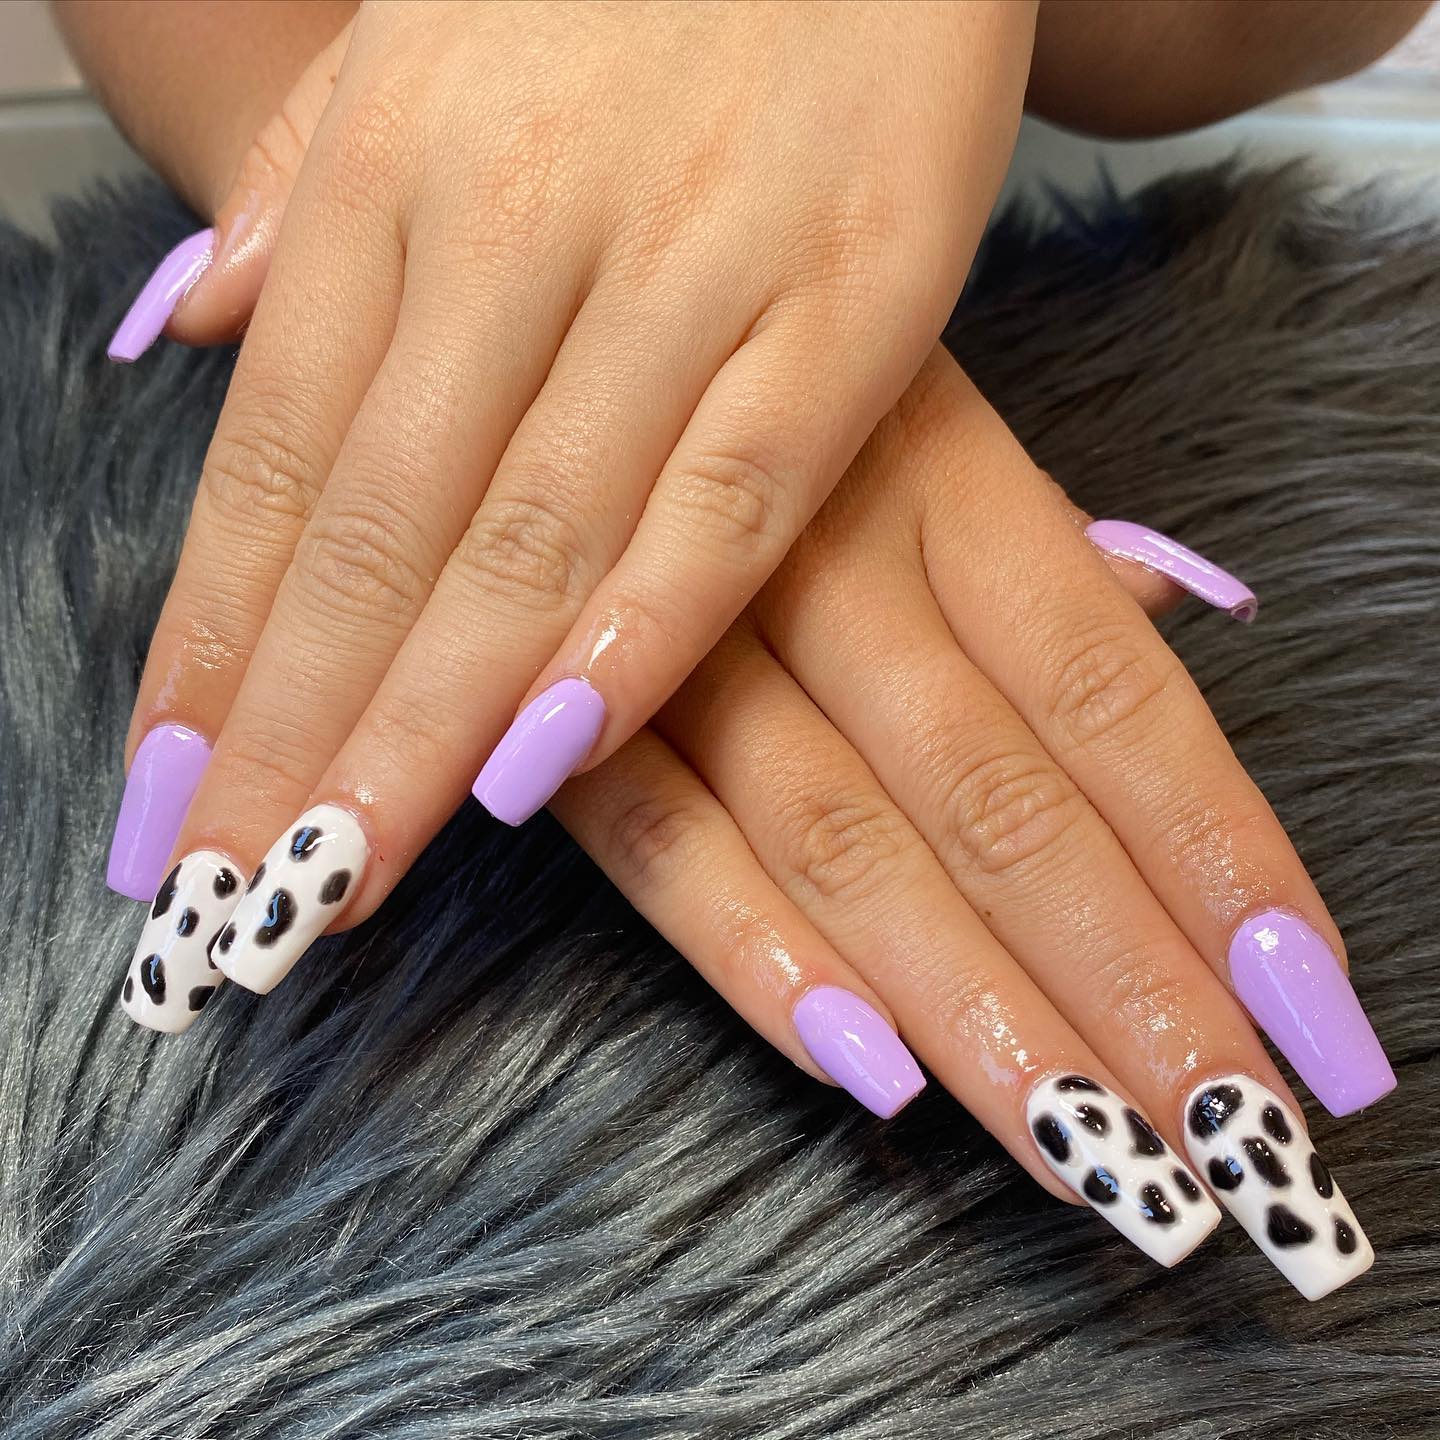 Cow print with lilac nail polish is a great combo. The contrast of the two colors is really fun, and it looks like you're wearing a cow on your nails.